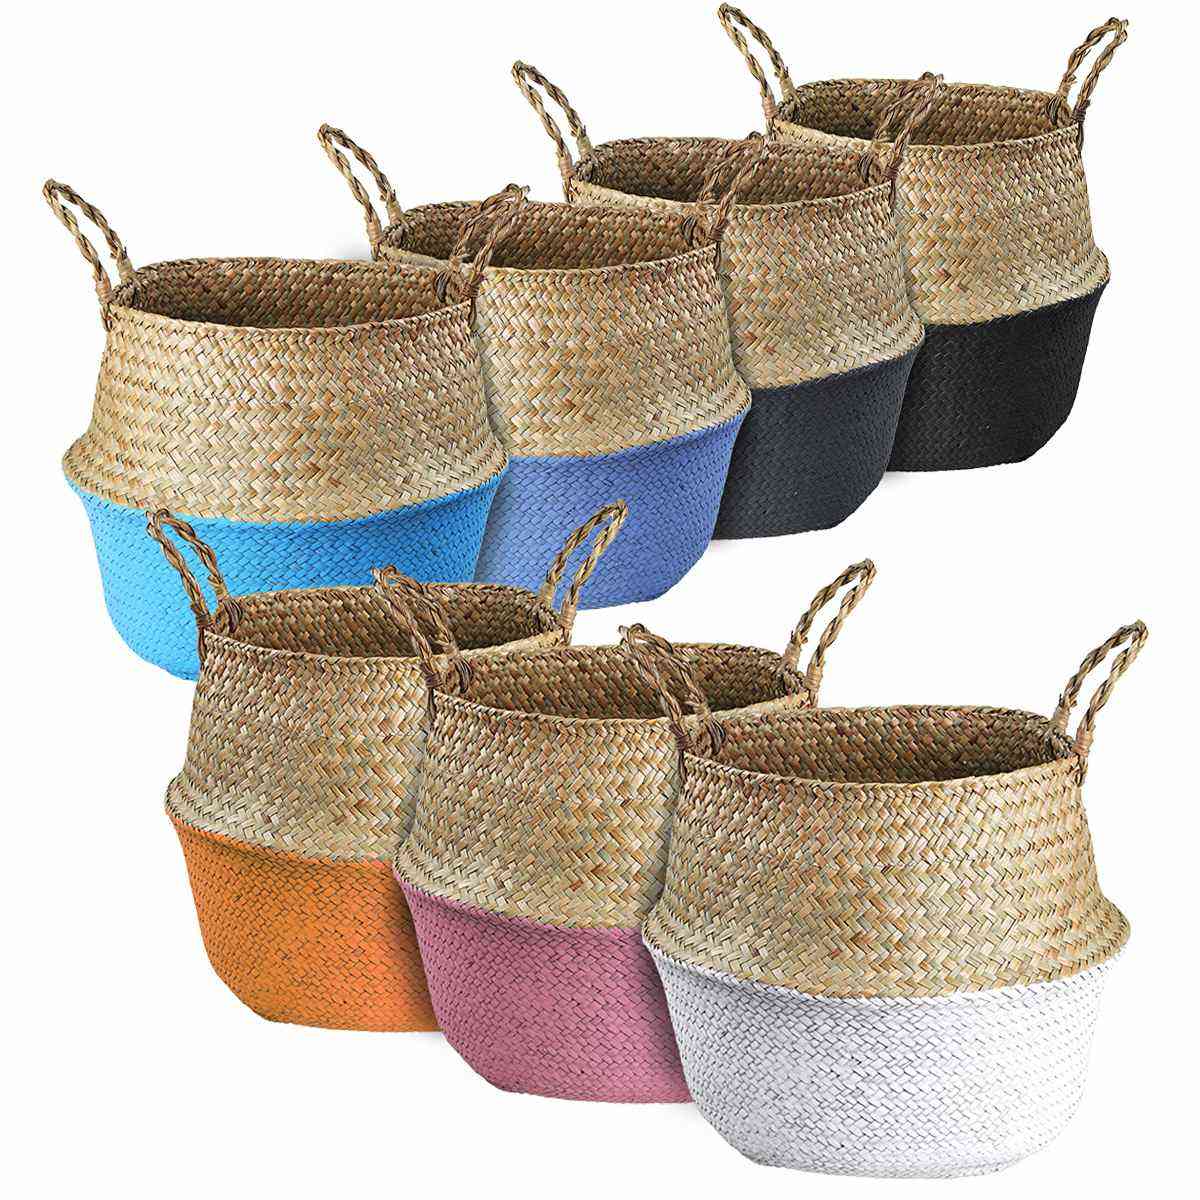 Storage Wicker Hanging Flower Pot Baskets For / Dirty Laundry